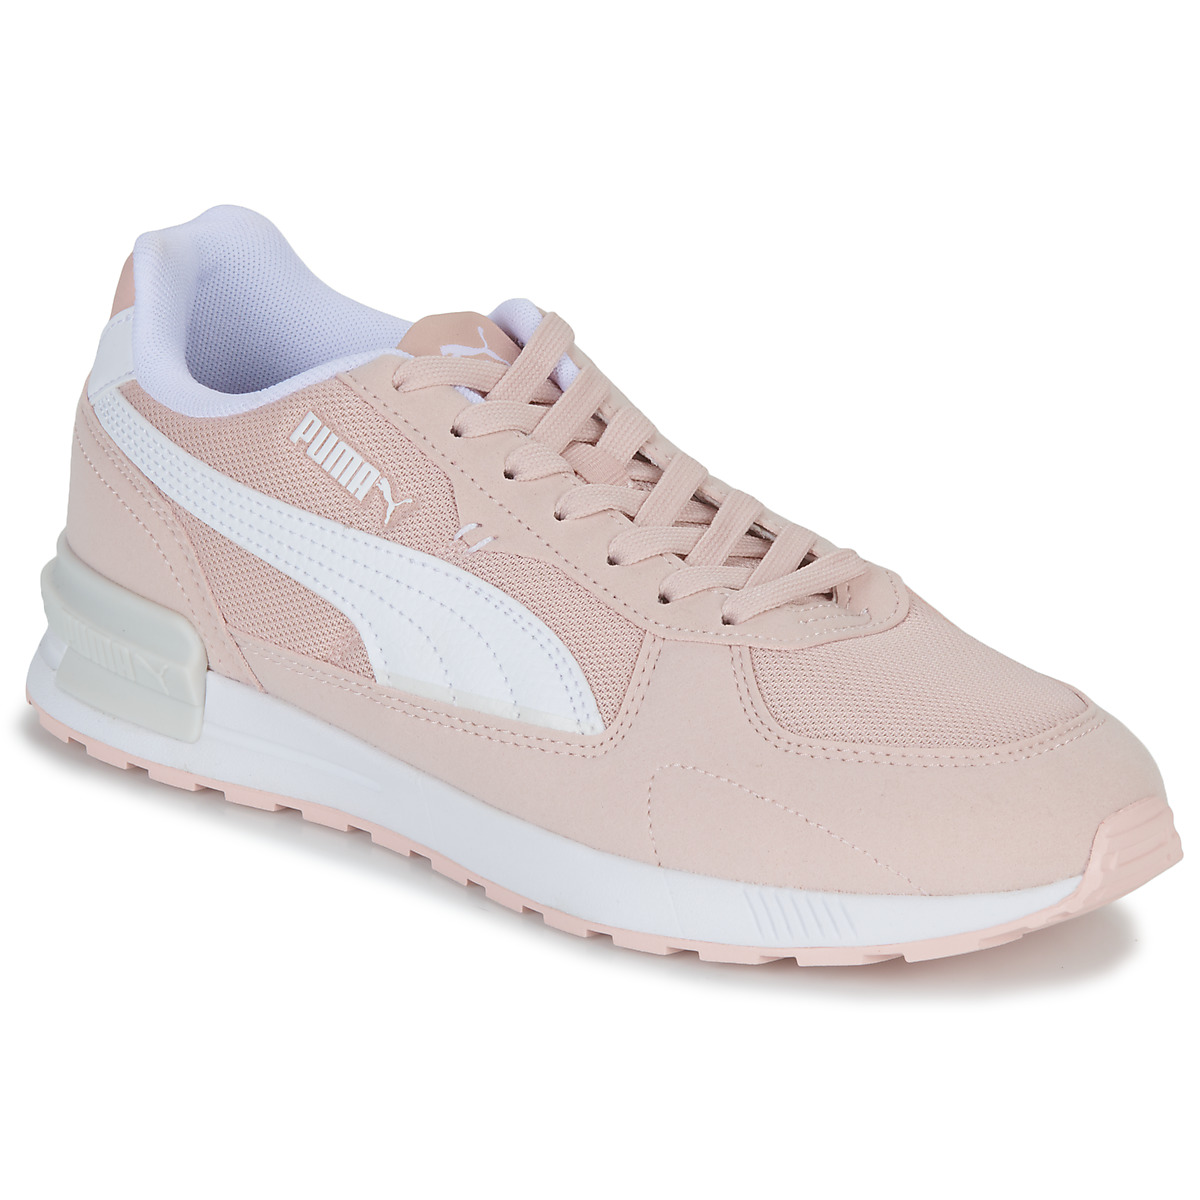 Pink top Puma delivery Women Shoes trainers Graviton Low NET Spartoo / Free - - Beige / | ! White